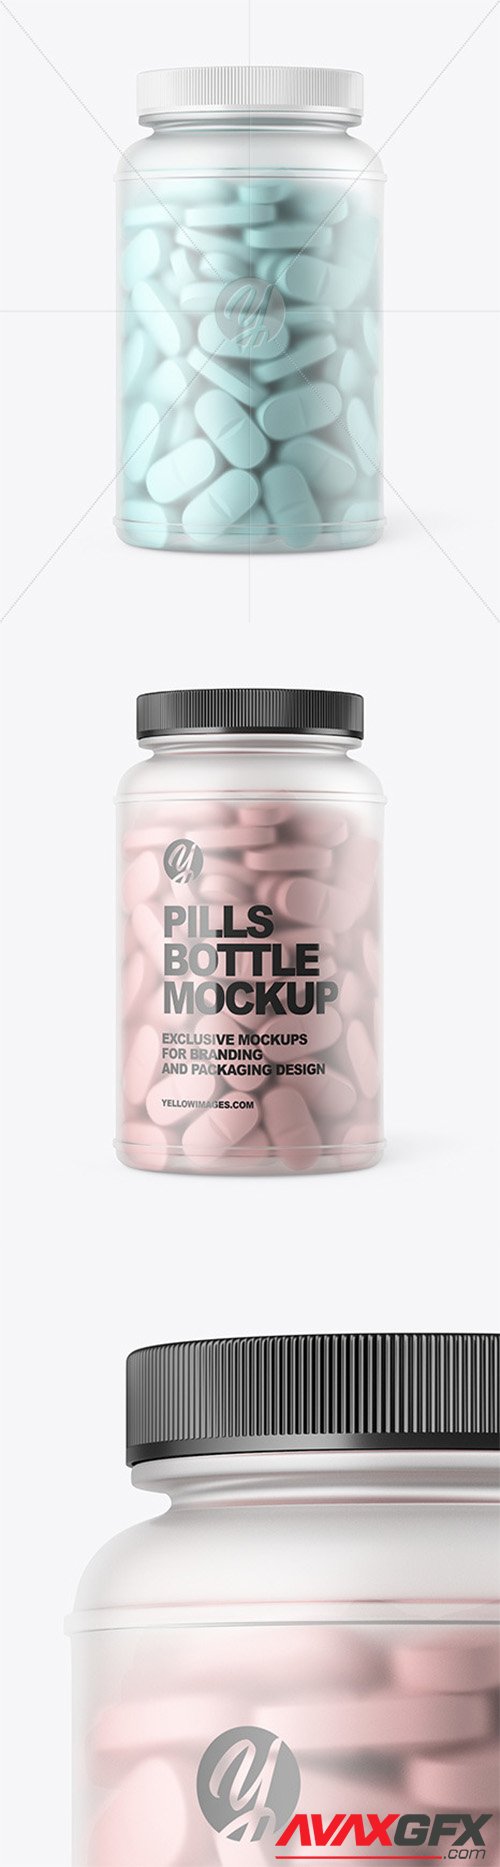 Download Frosted Pills Bottle Mockup 60399 Avaxgfx All Downloads That You Need In One Place Graphic From Nitroflare Rapidgator Yellowimages Mockups